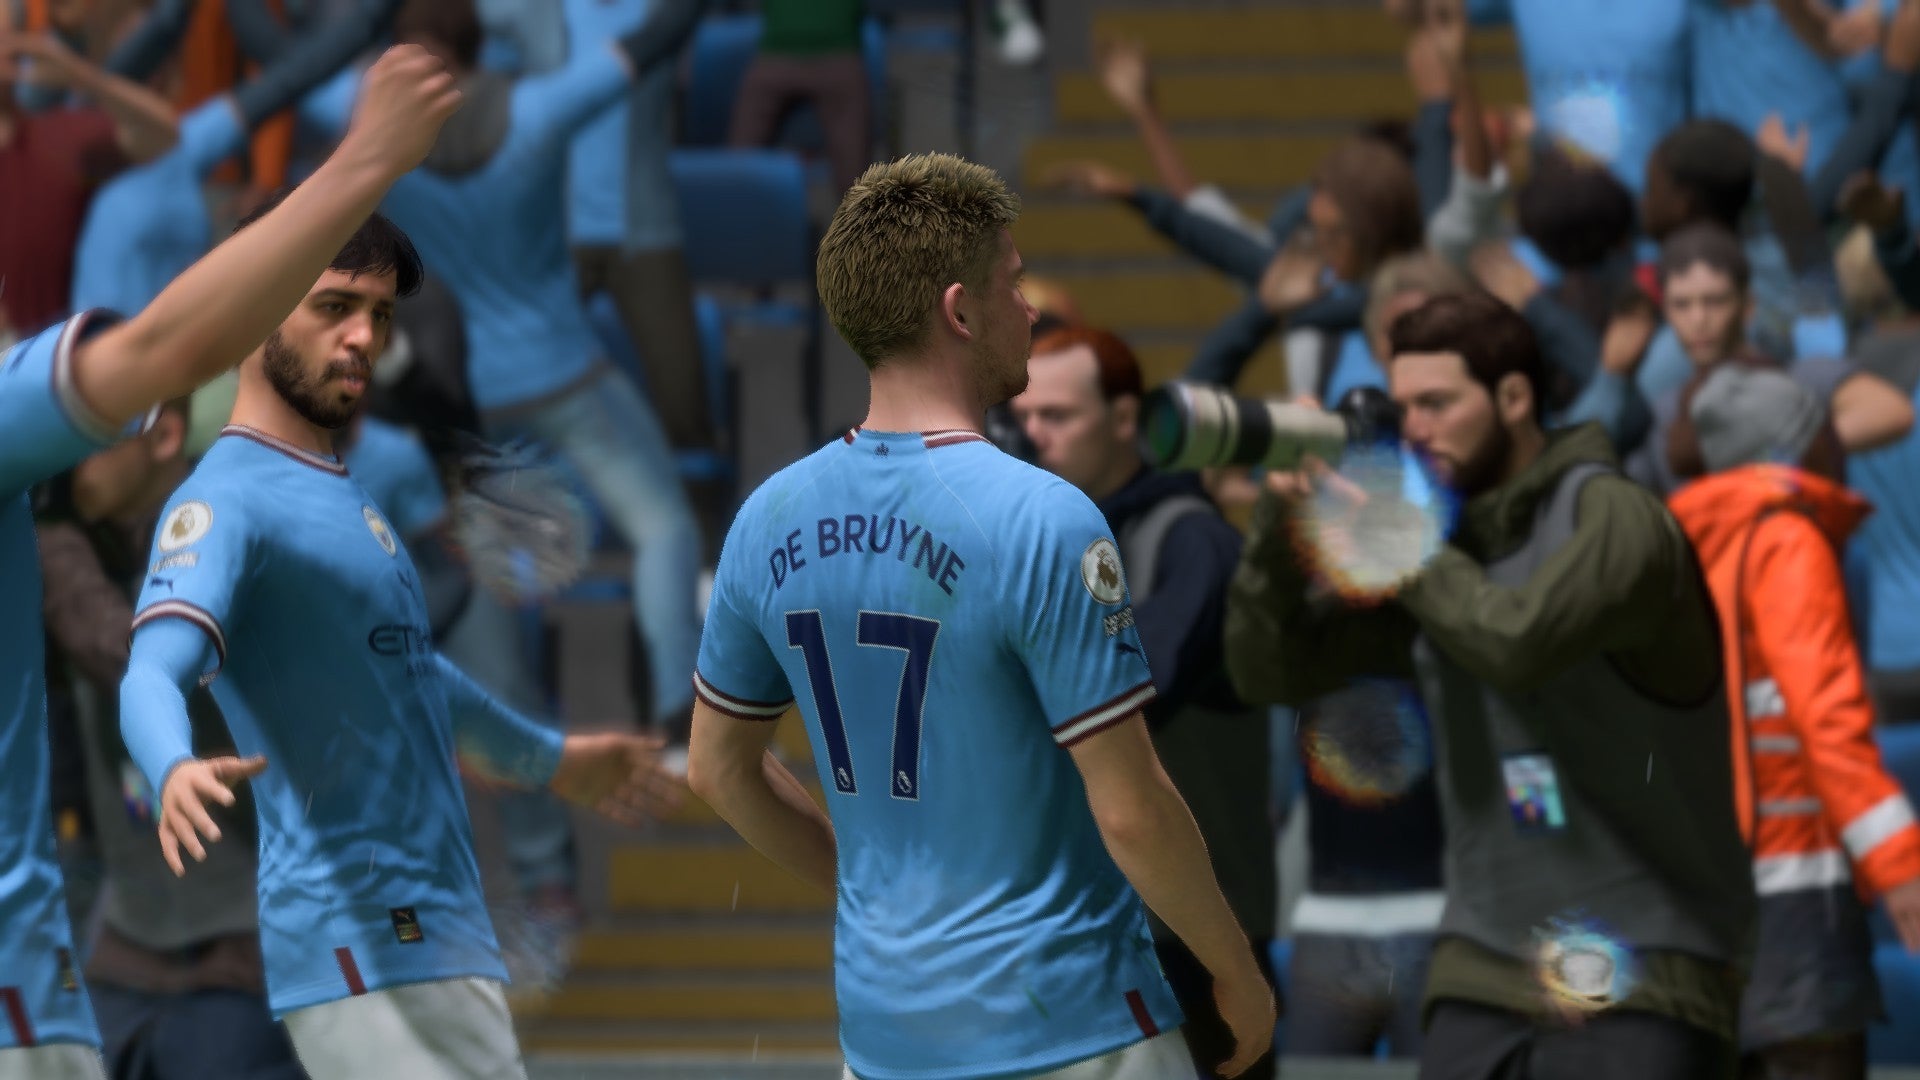 FIFA 23 screenshot showing De Bruyne cheering to the crowd after scoring a goal.